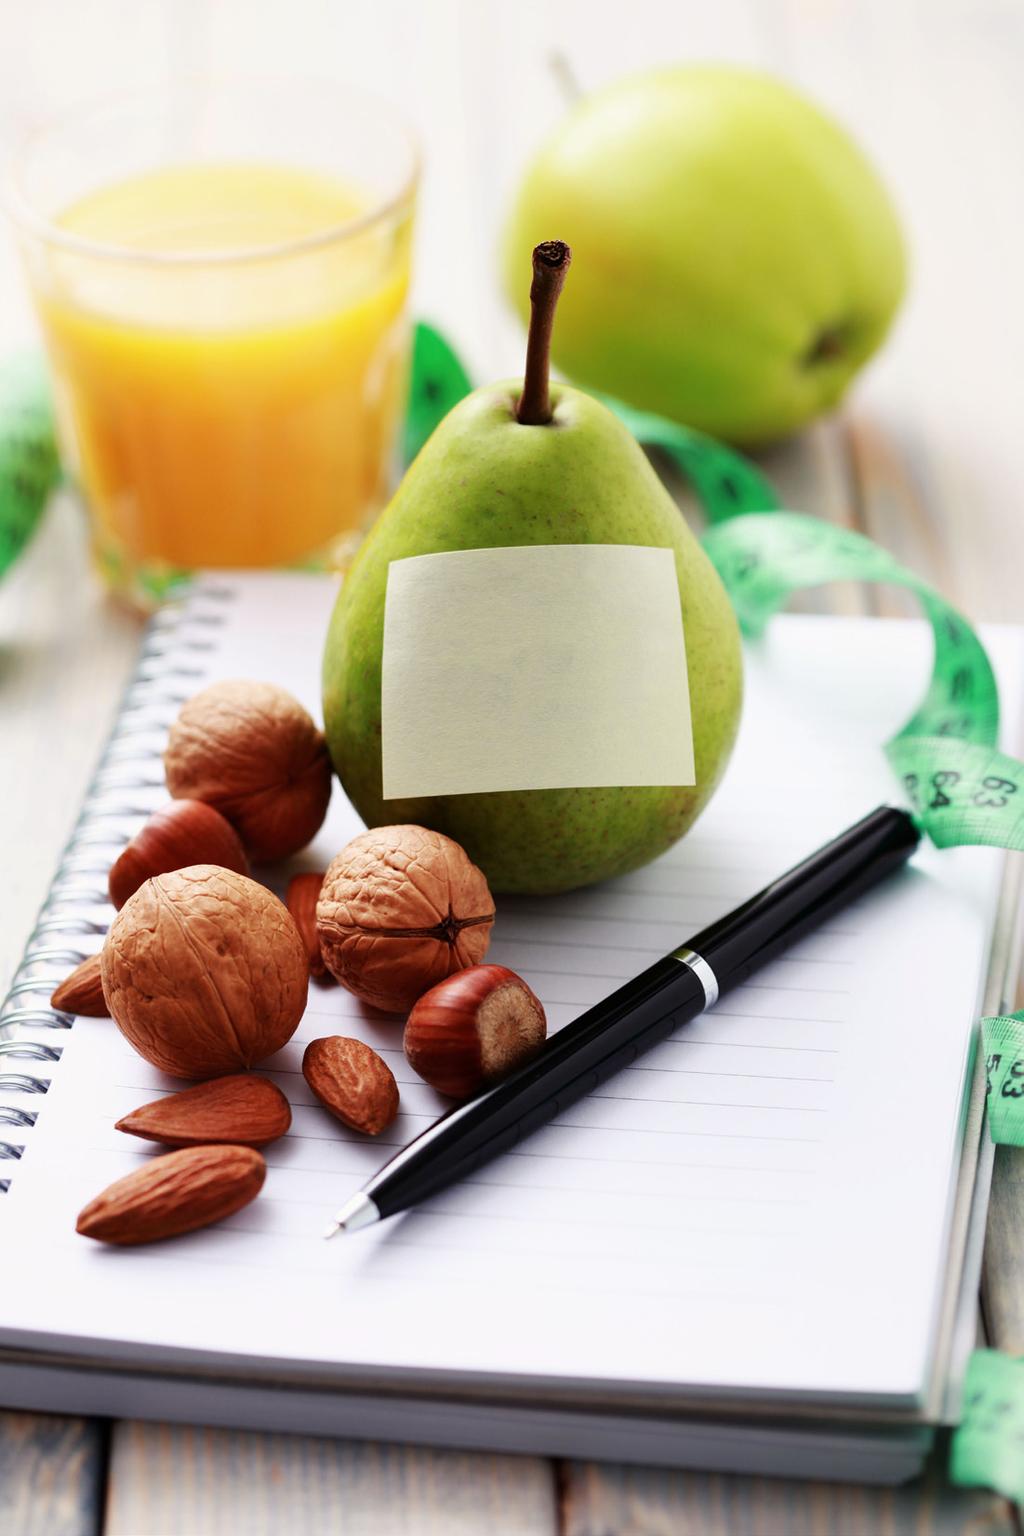 3 By nature, using a food diary is a highly bio-individual practice: Some clients may rely on this tool daily to keep them on track, while others might prefer to only track food for short periods of